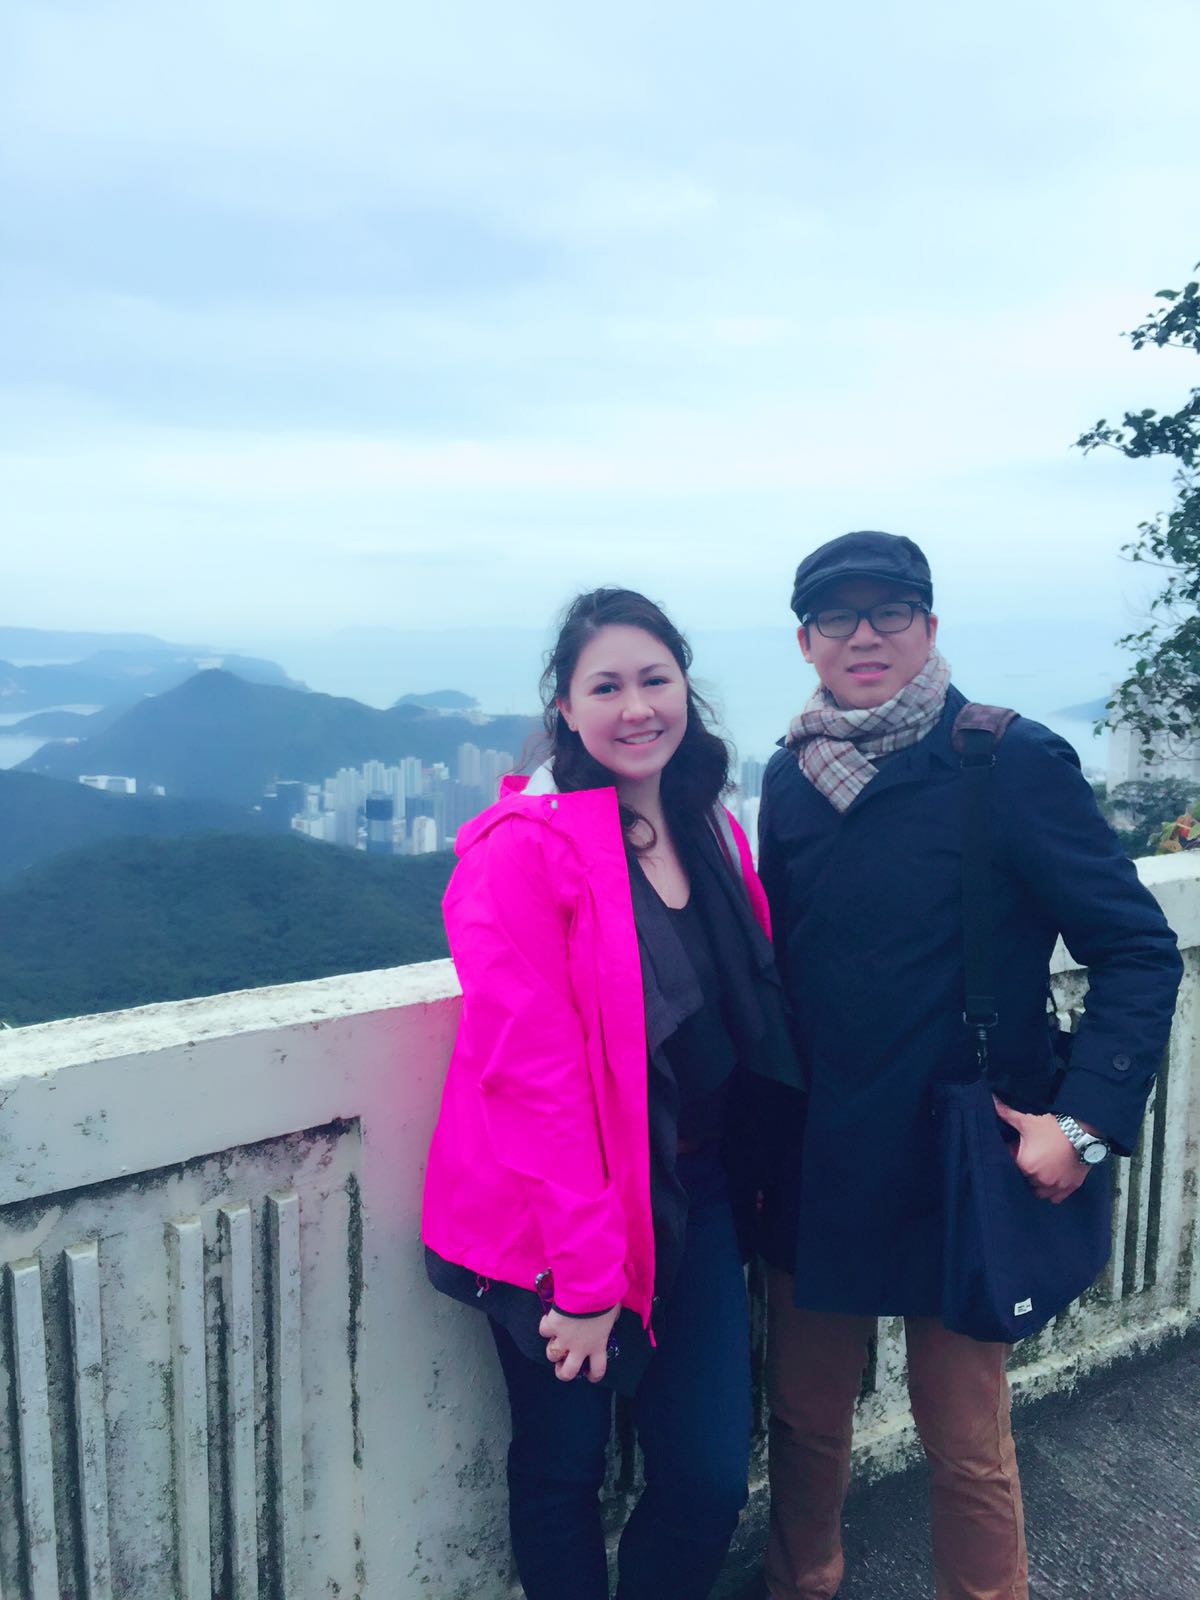 Frank the tour guide takes photo with Miss Galloway at Mount Kellett Road at Victoria Peak.